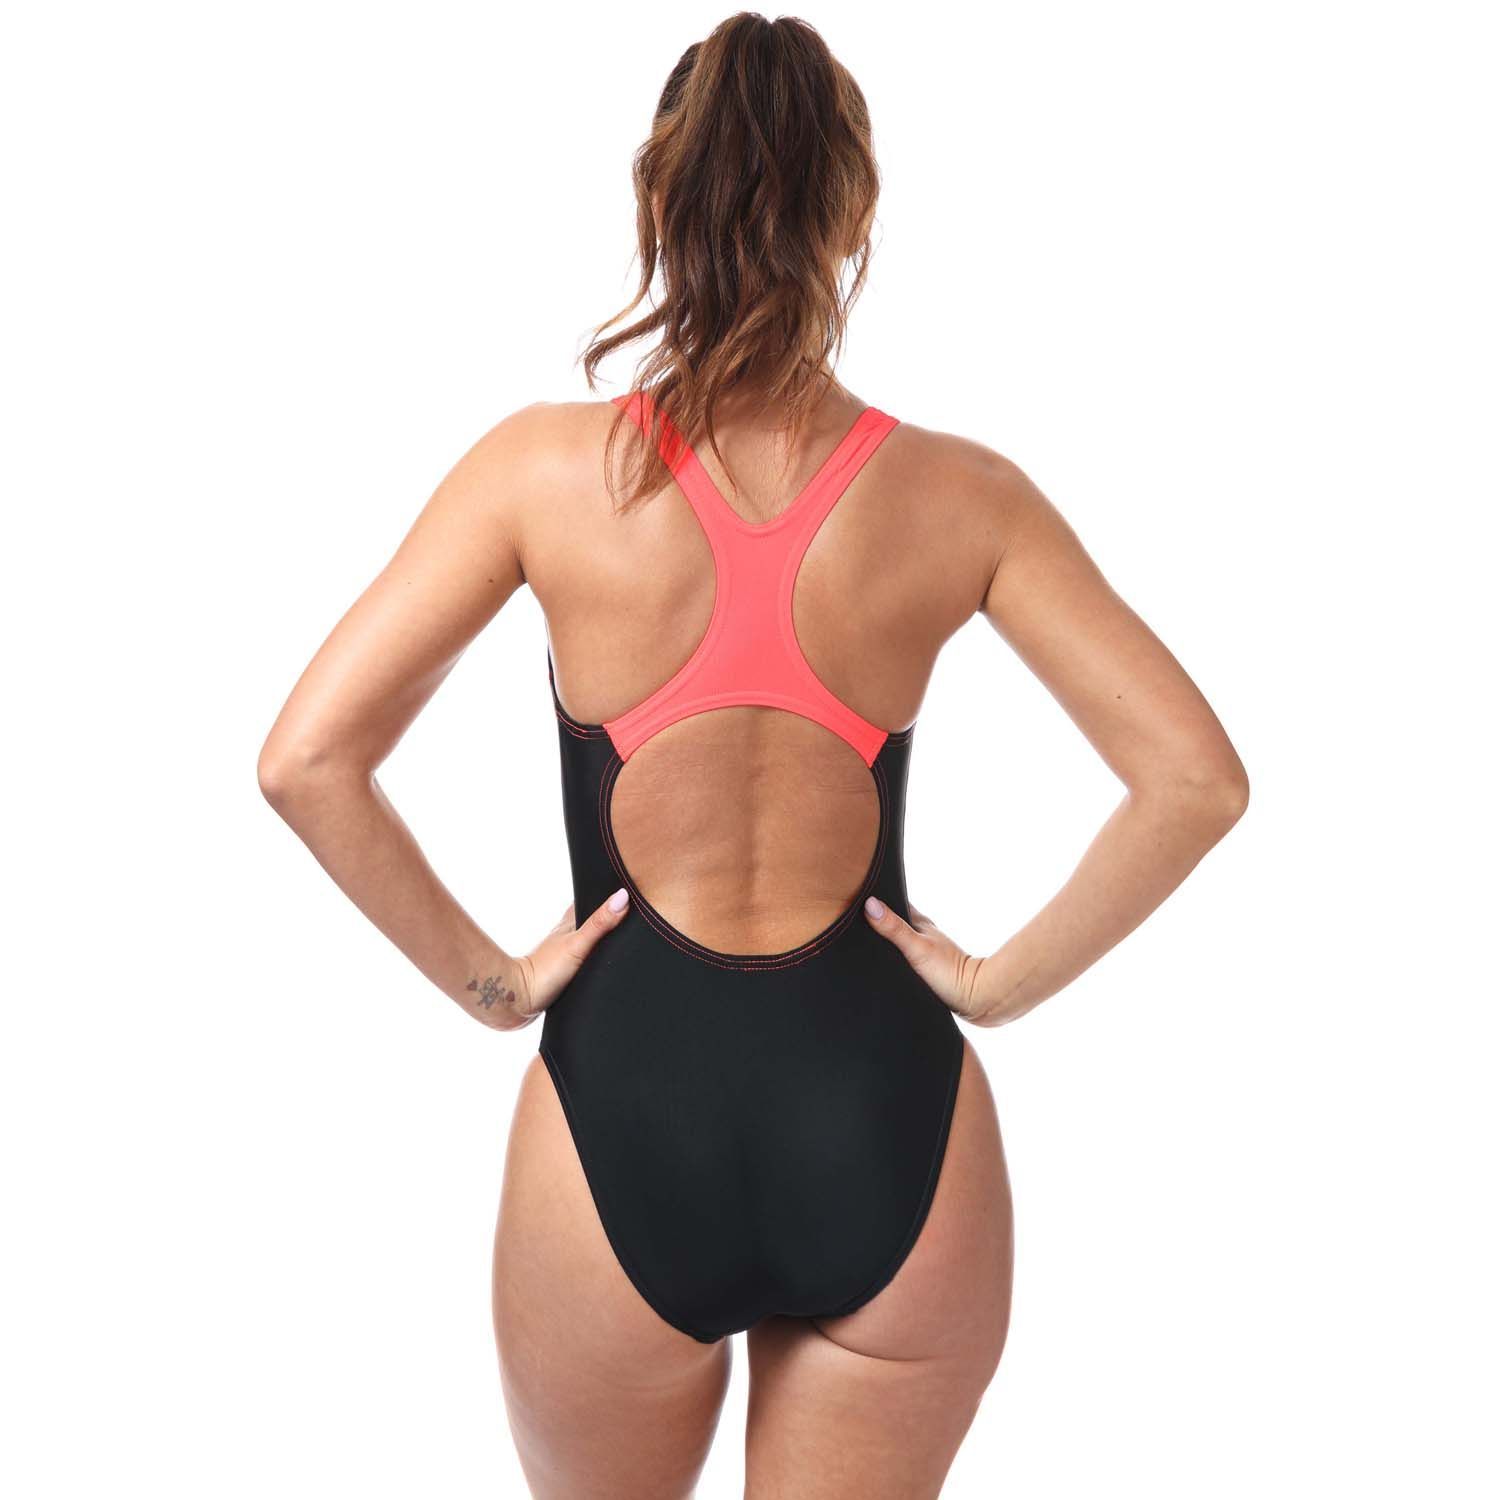 Womens Speedo Hexagonal Tech Medalist Swimsuit in black - red.- Medium cut neck.- X-back.- Higher chlorine resistance than standard swimwear fabrics.- Speedo branding.- Shape retention.- Body: 80% Nylon  20% Elastane. Lining: 100% Polyester. Trim: 53% Polyester  47% PBT Polyester.- 812346B023Please note that returns will only be accepted if the hygiene label is still attached to the product.